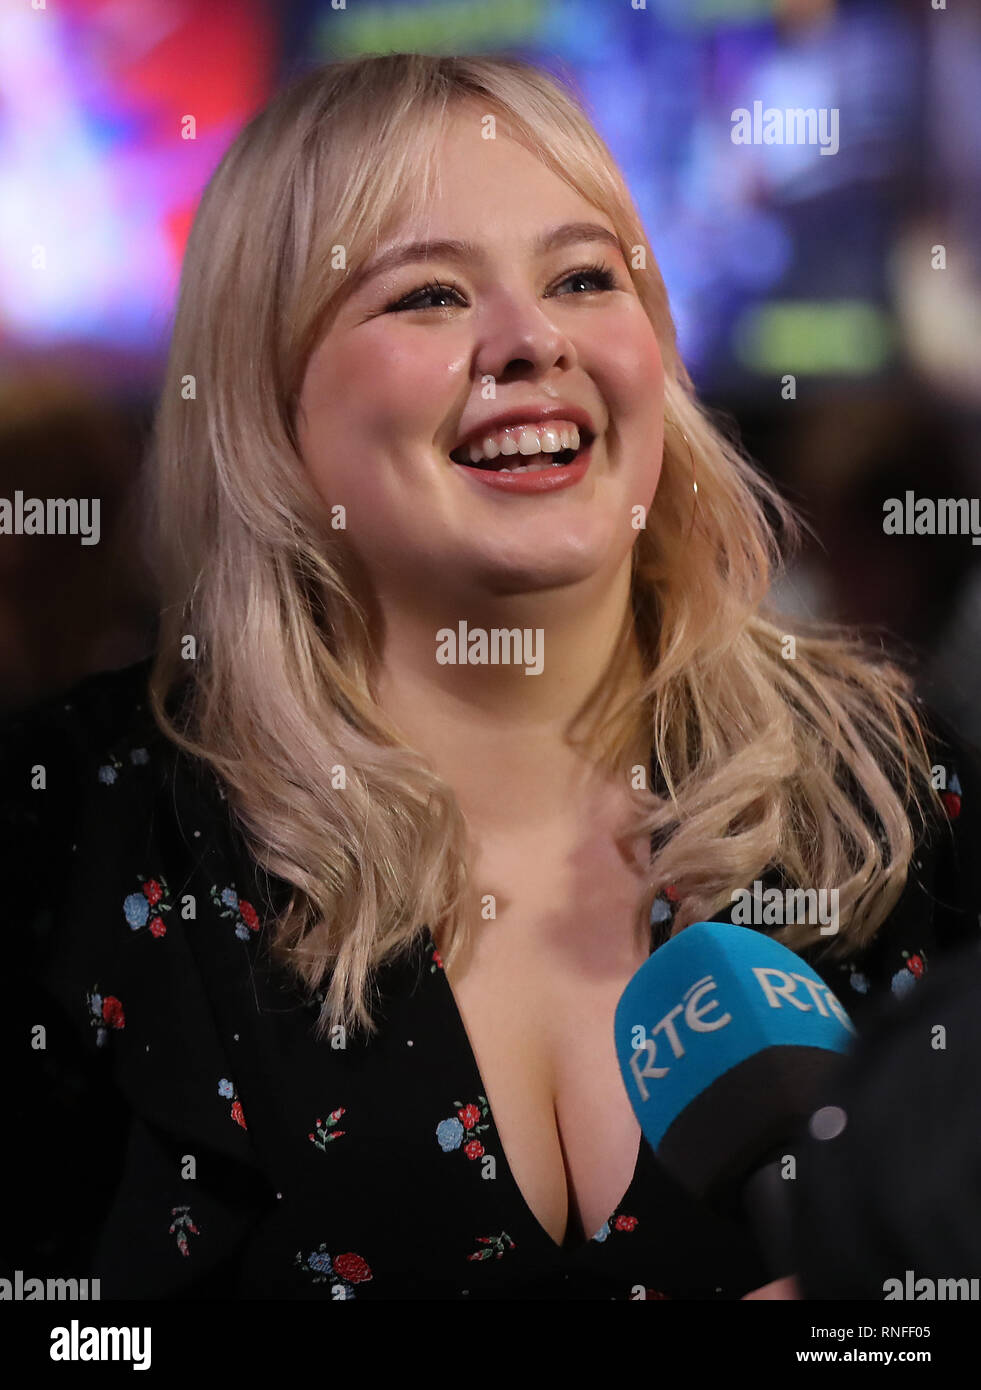 Nicola Coughlan arrives at the Omniplex Cinema in Londonderry for the Derry Girls premiere ahead of the broadcast of the second series on Channel 4. Stock Photo